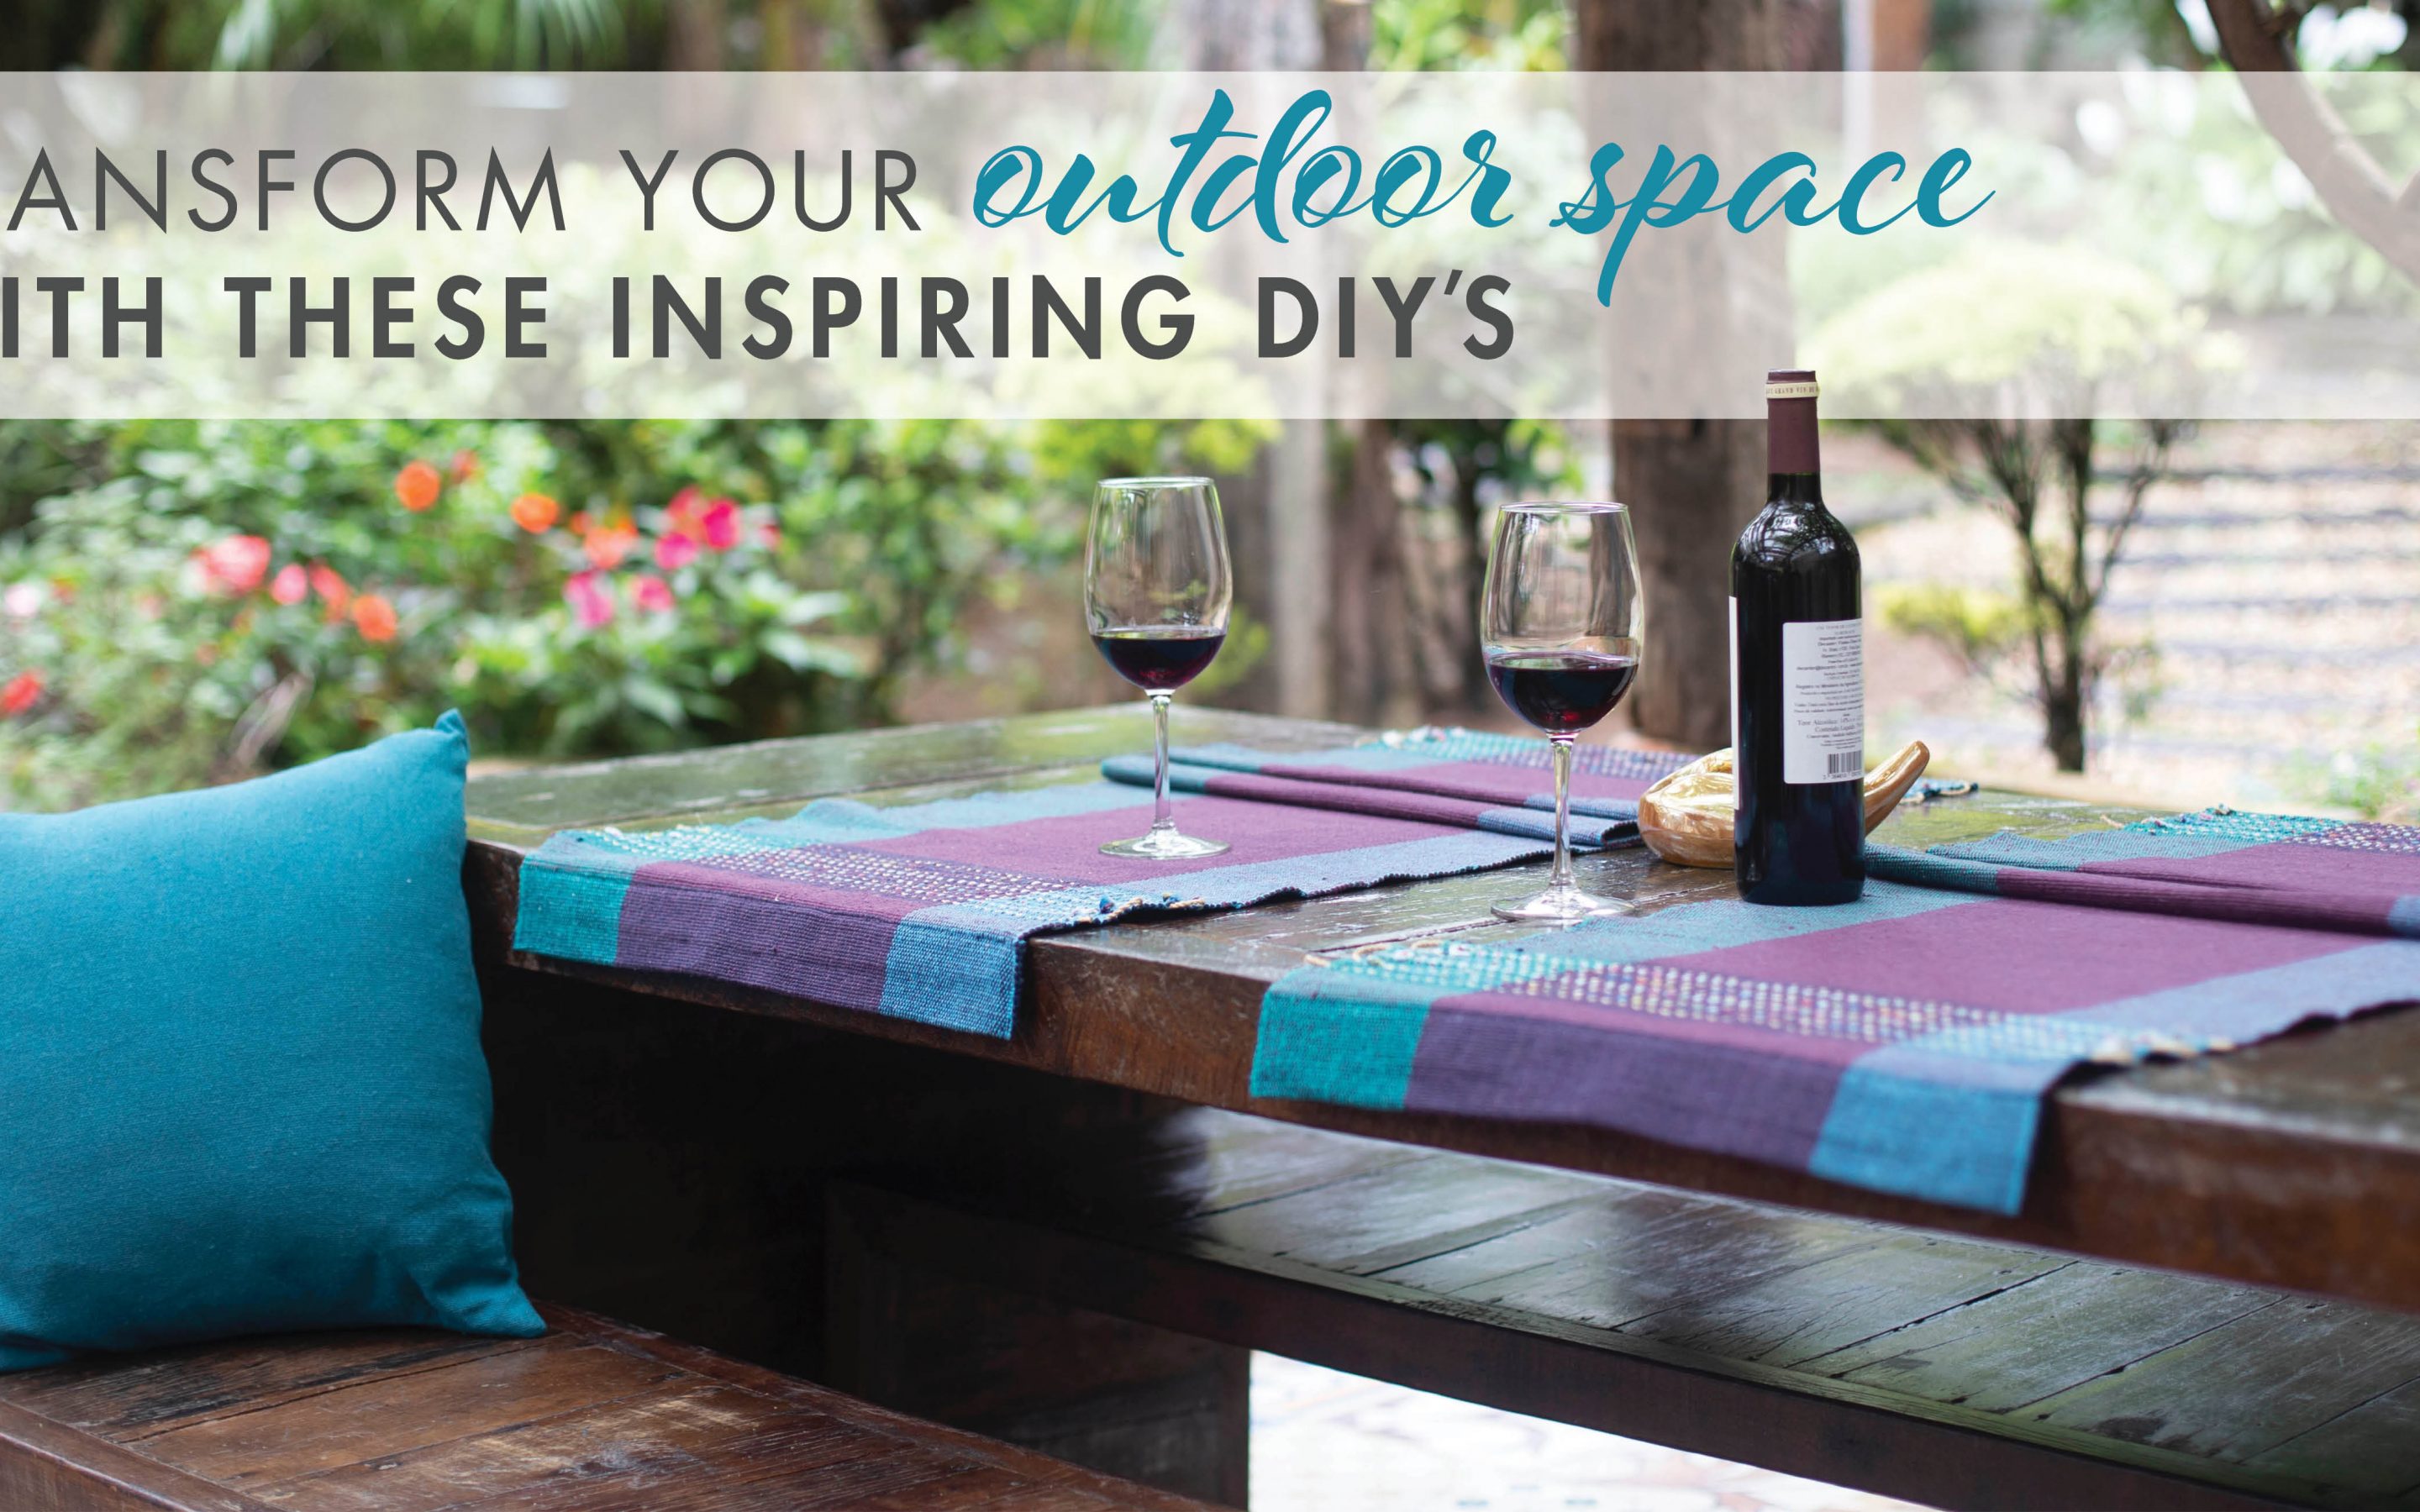 Transform Your Outdoor Space With These Inspiring DIY’s